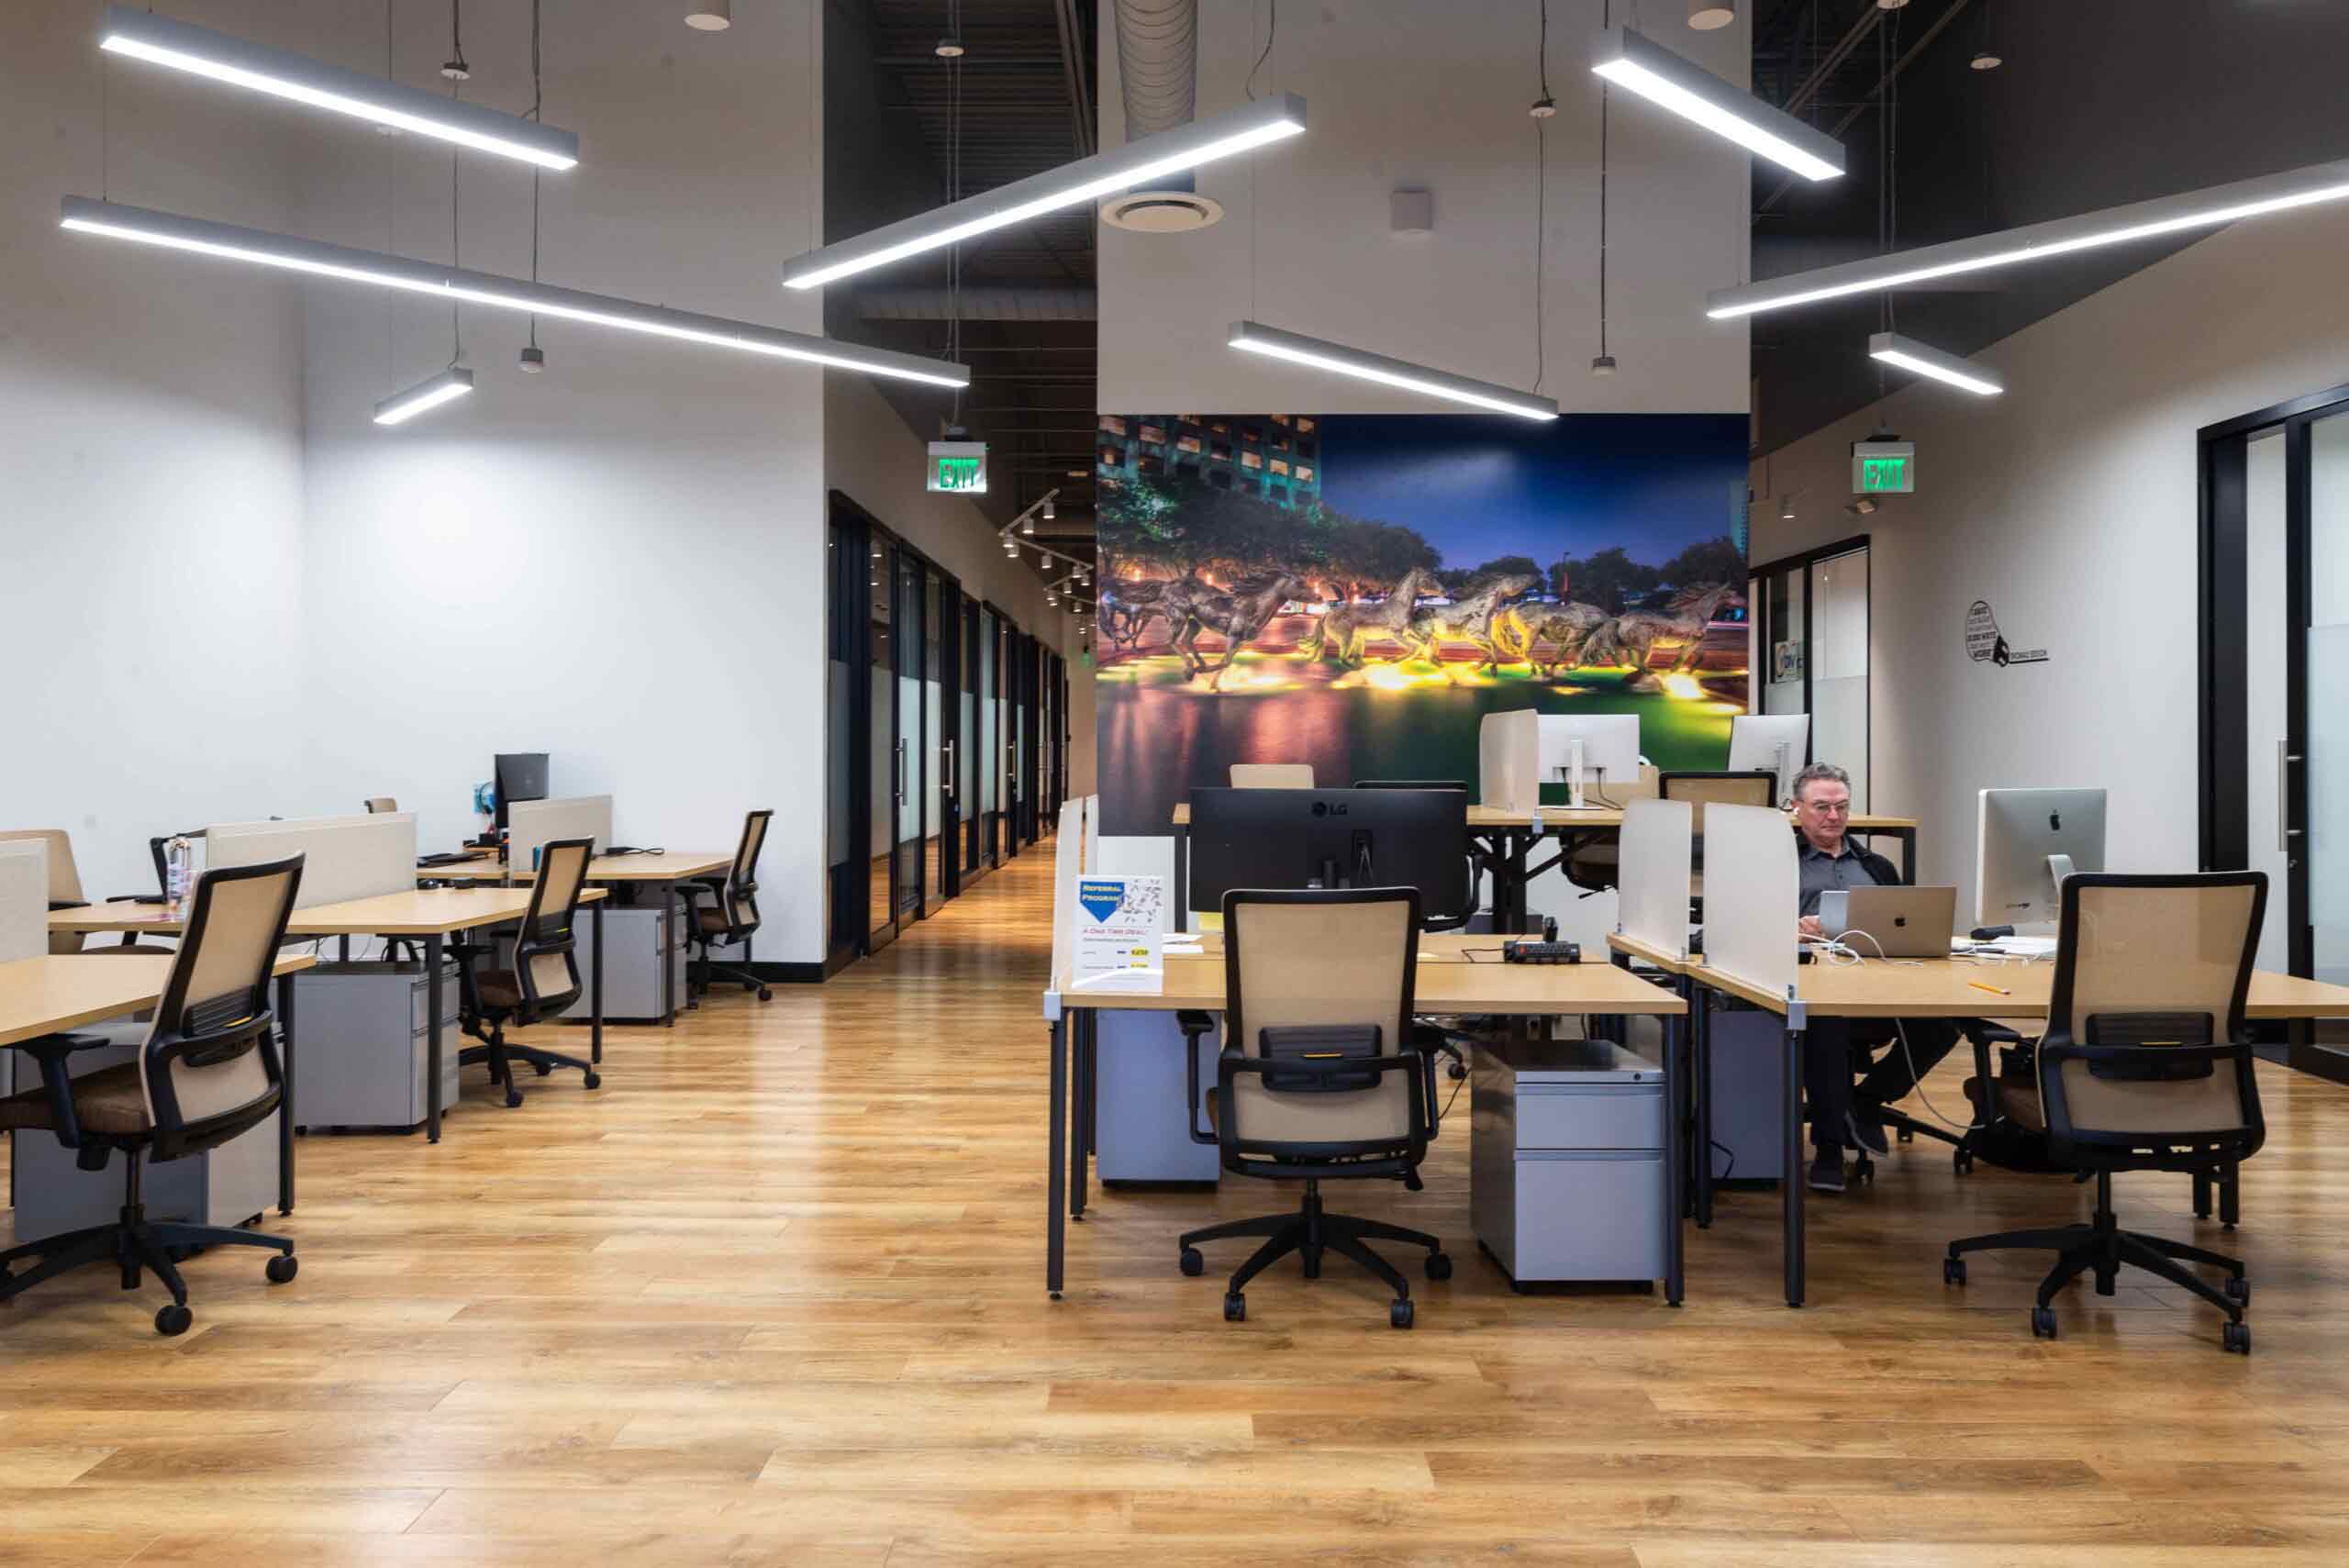 Coworking space in Dallas. Shared office has many single desks for professionals.